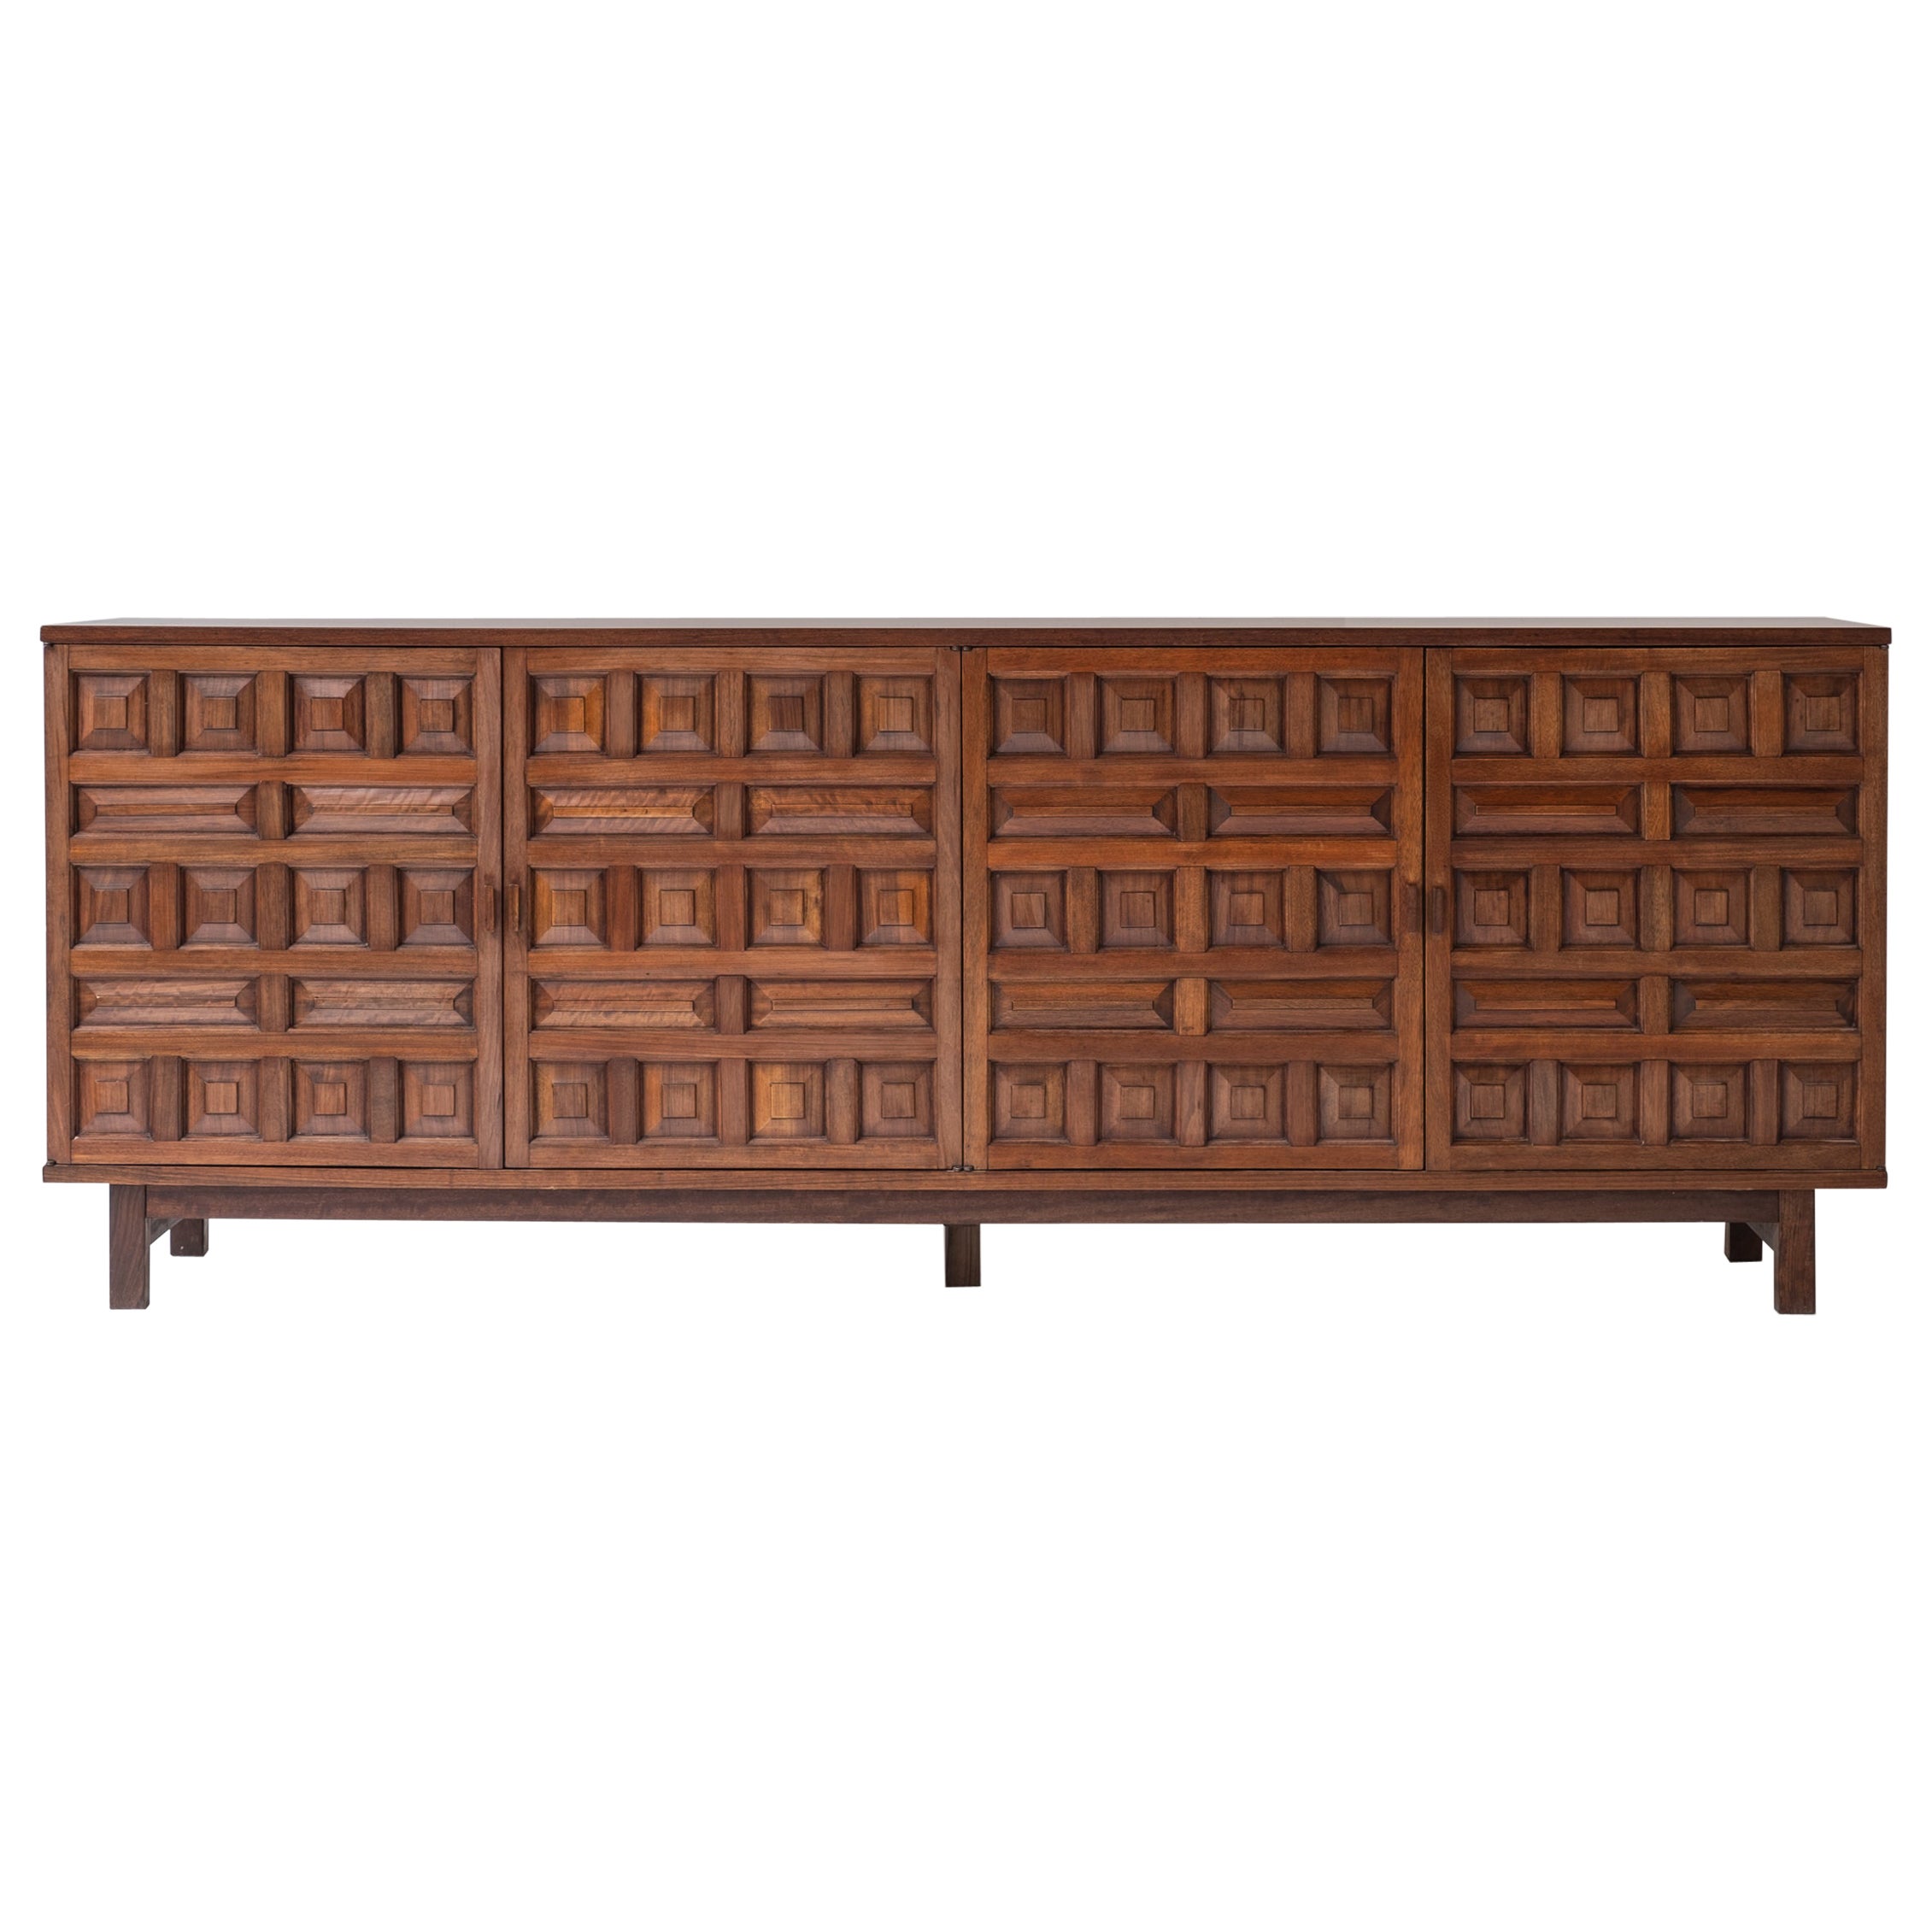 Brutalist sideboard from Spain, designed and manufactured in the 1970s.